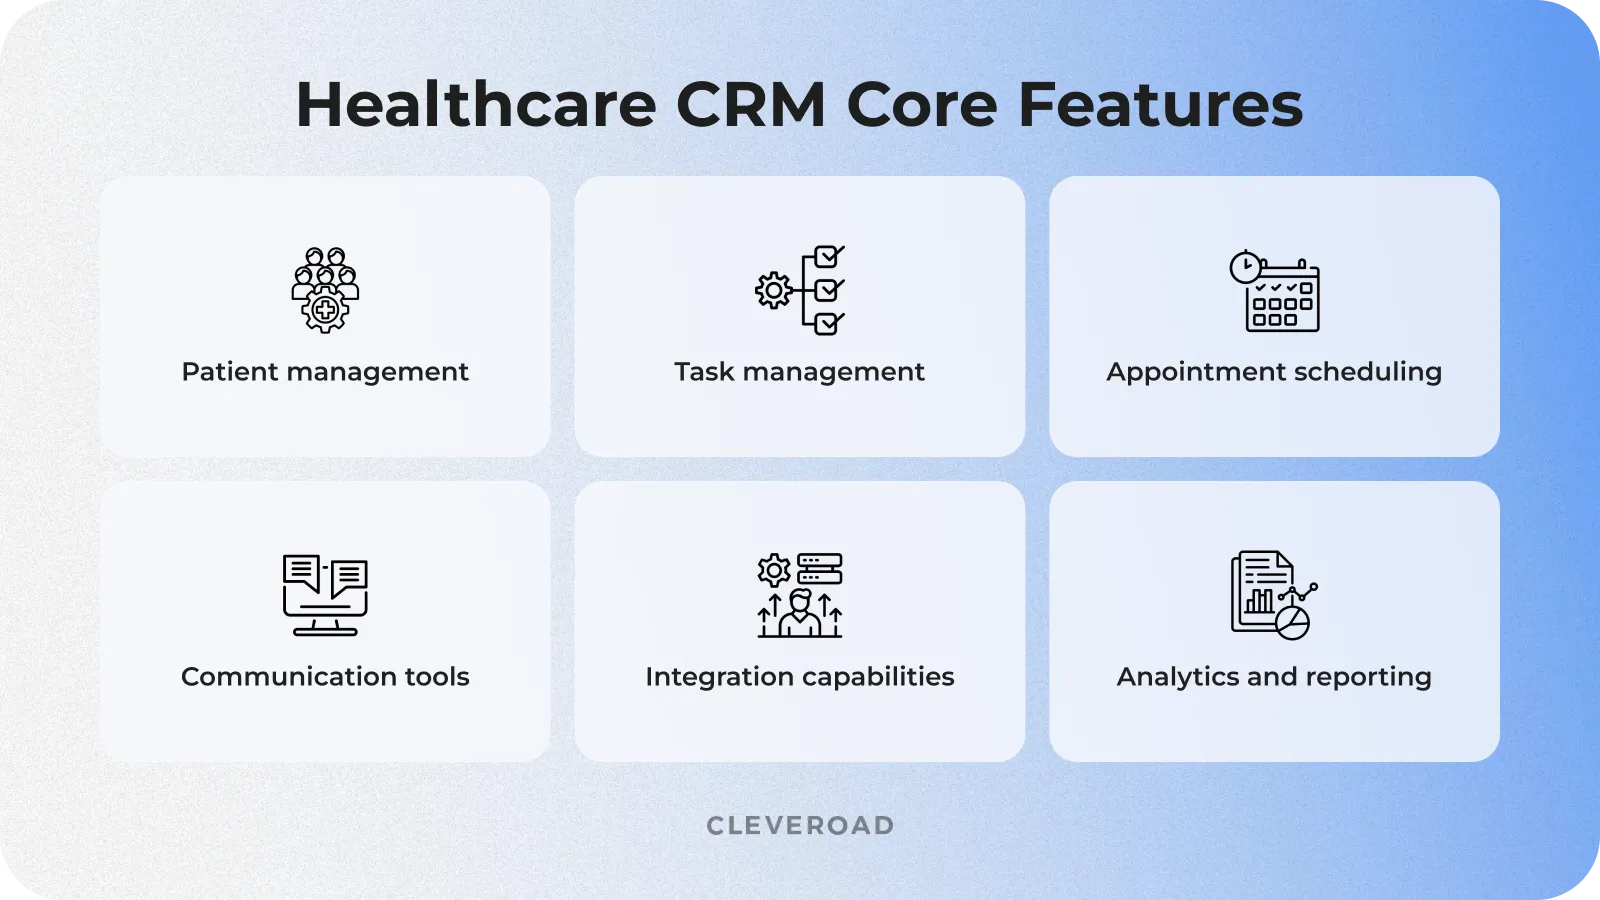 Main healthcare CRM features